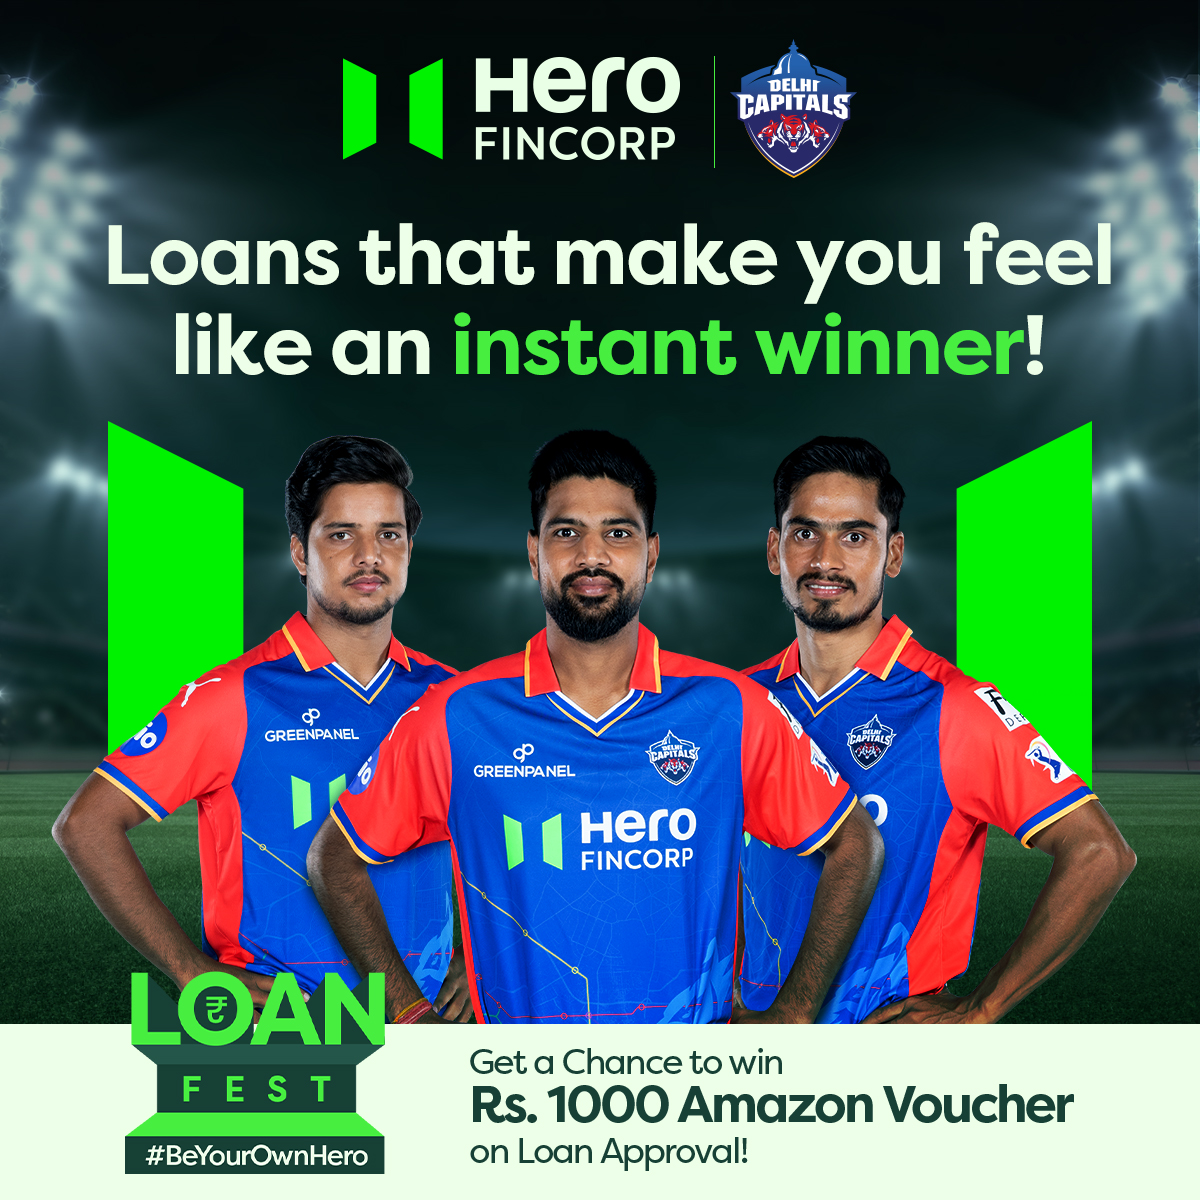 Dive into the Loan Fest with Hero FinCorp! Experience the IPL (Instant Personal Loan) thrill and score big with a ₹1000 Amazon voucher. Apply now: loan-mela.onelink.me/Msx1/zclwl18b #HeroFinCorp #LoanFest #BeYourOwnHero #IPLBonanza #InstantPersonalLoan